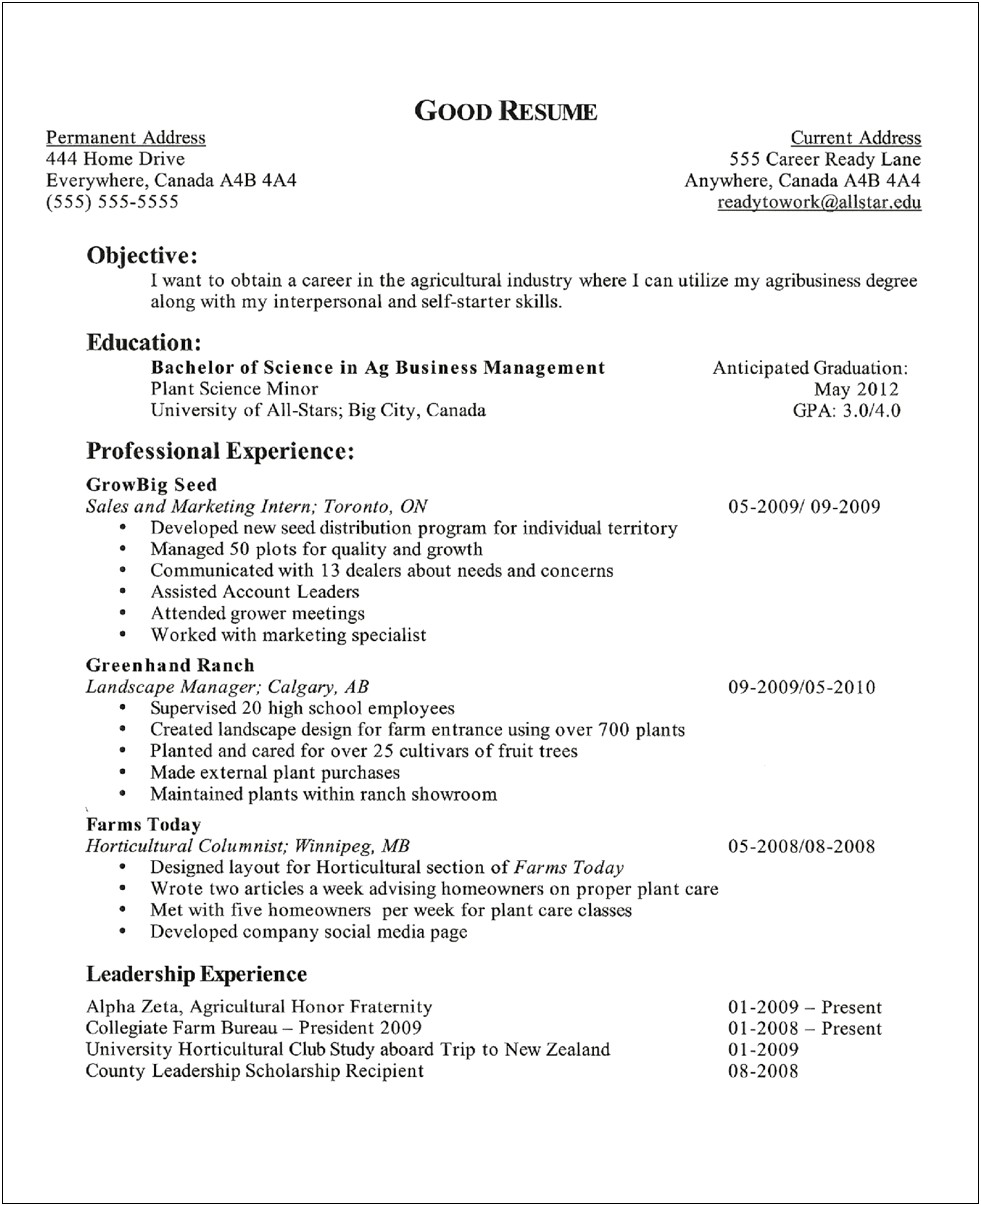 Resume Objective For An Student